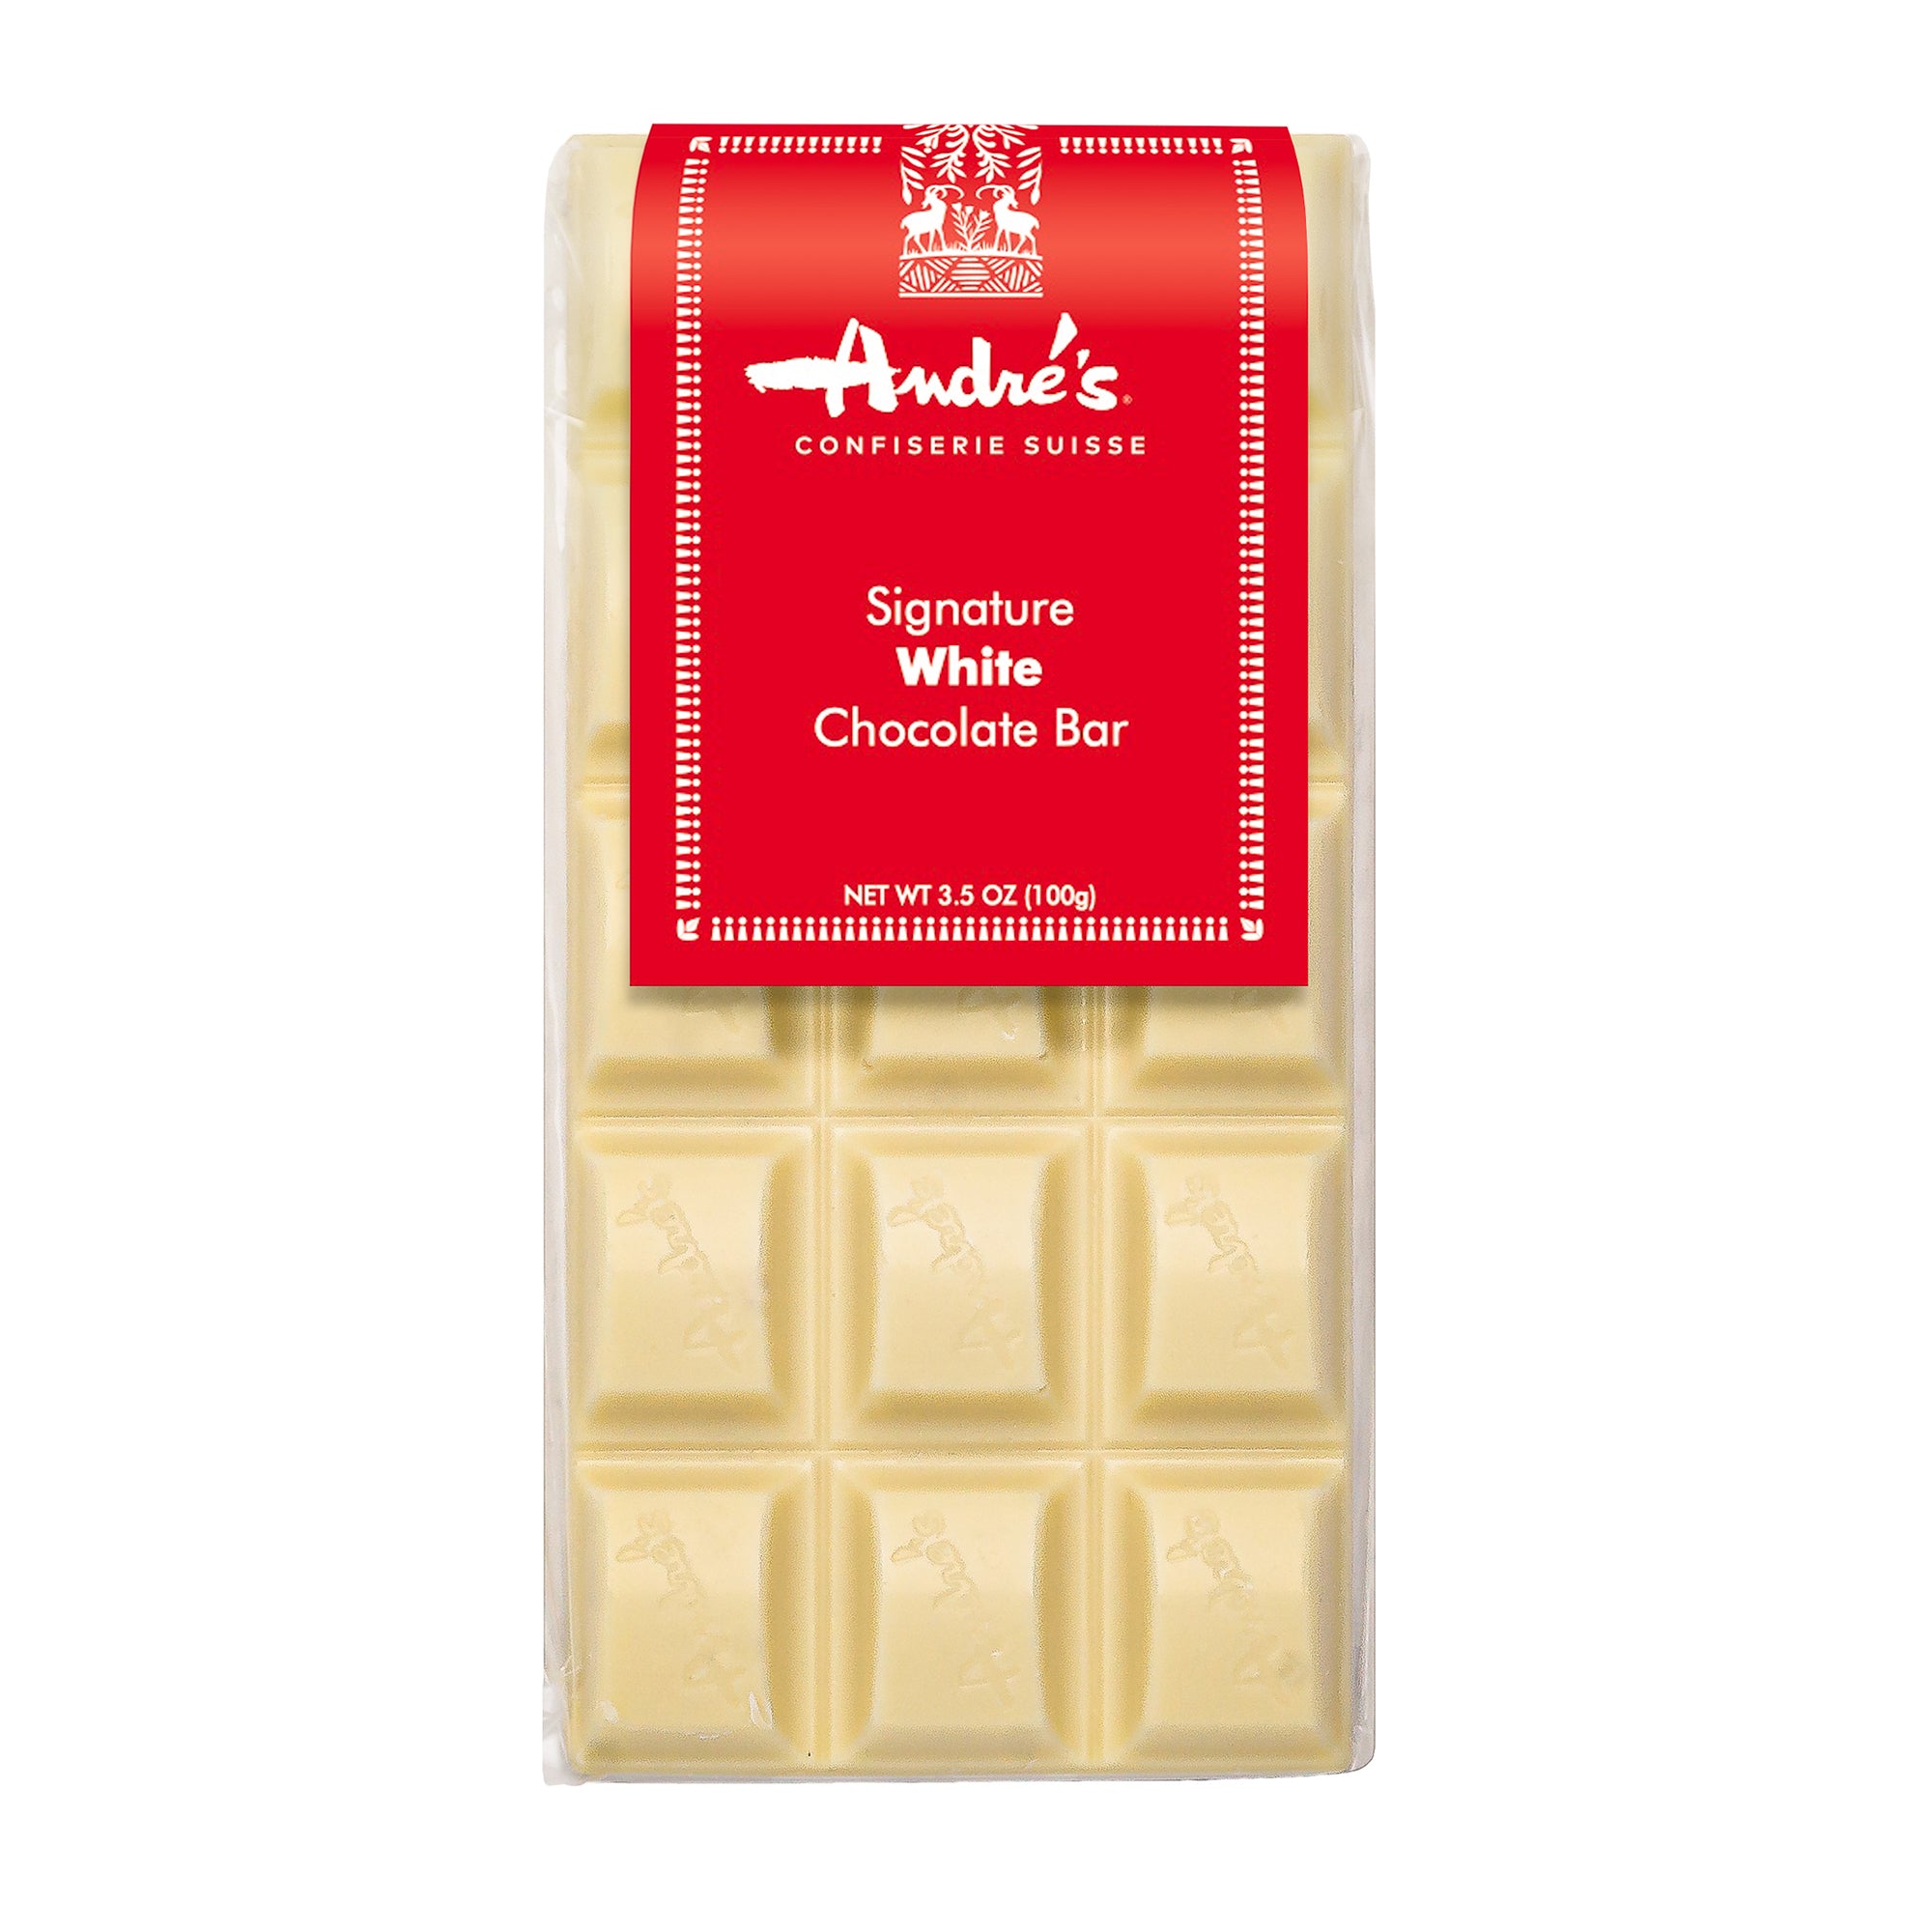 Winter Holiday Gift Box - André's Confiserie Suisse